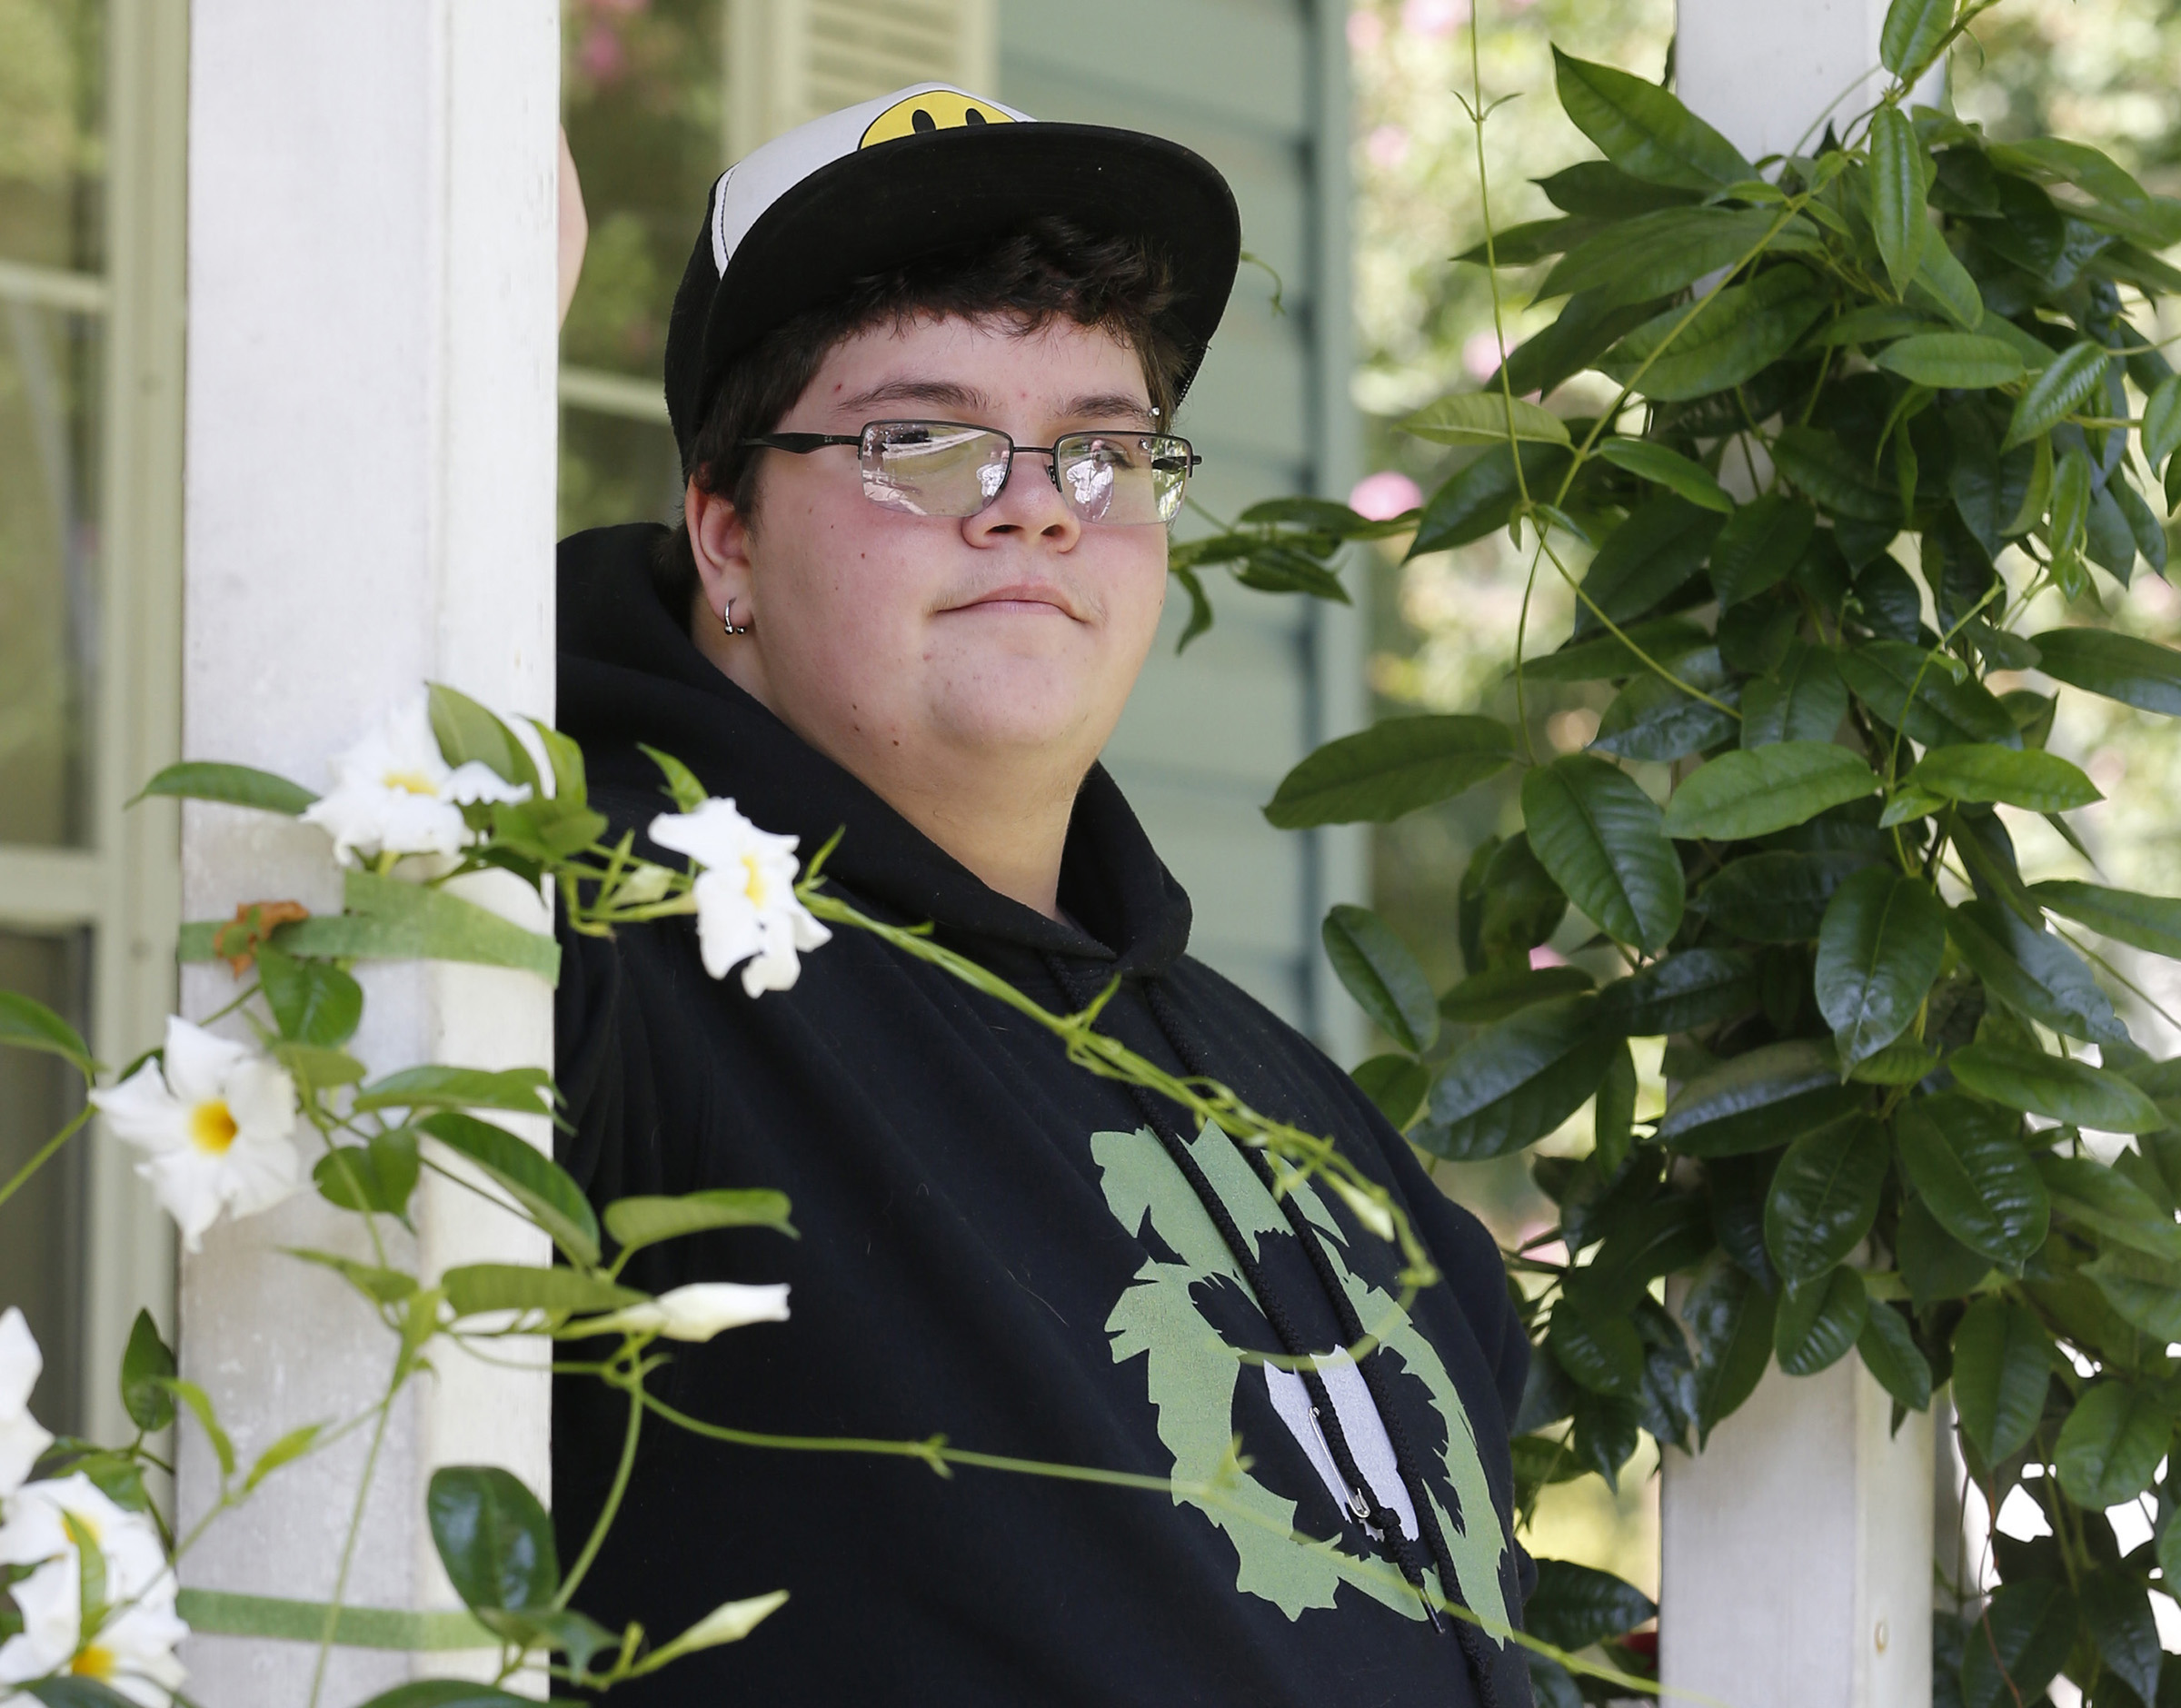 Gavin Grimm on his front porch at his home in Gloucester, Virginia on Aug. 25, 2019. A U.S. appeals court overturned a policy barring the transgender student from using the boys' restrooms at his Virginia high school. (Steve Helber—AP)